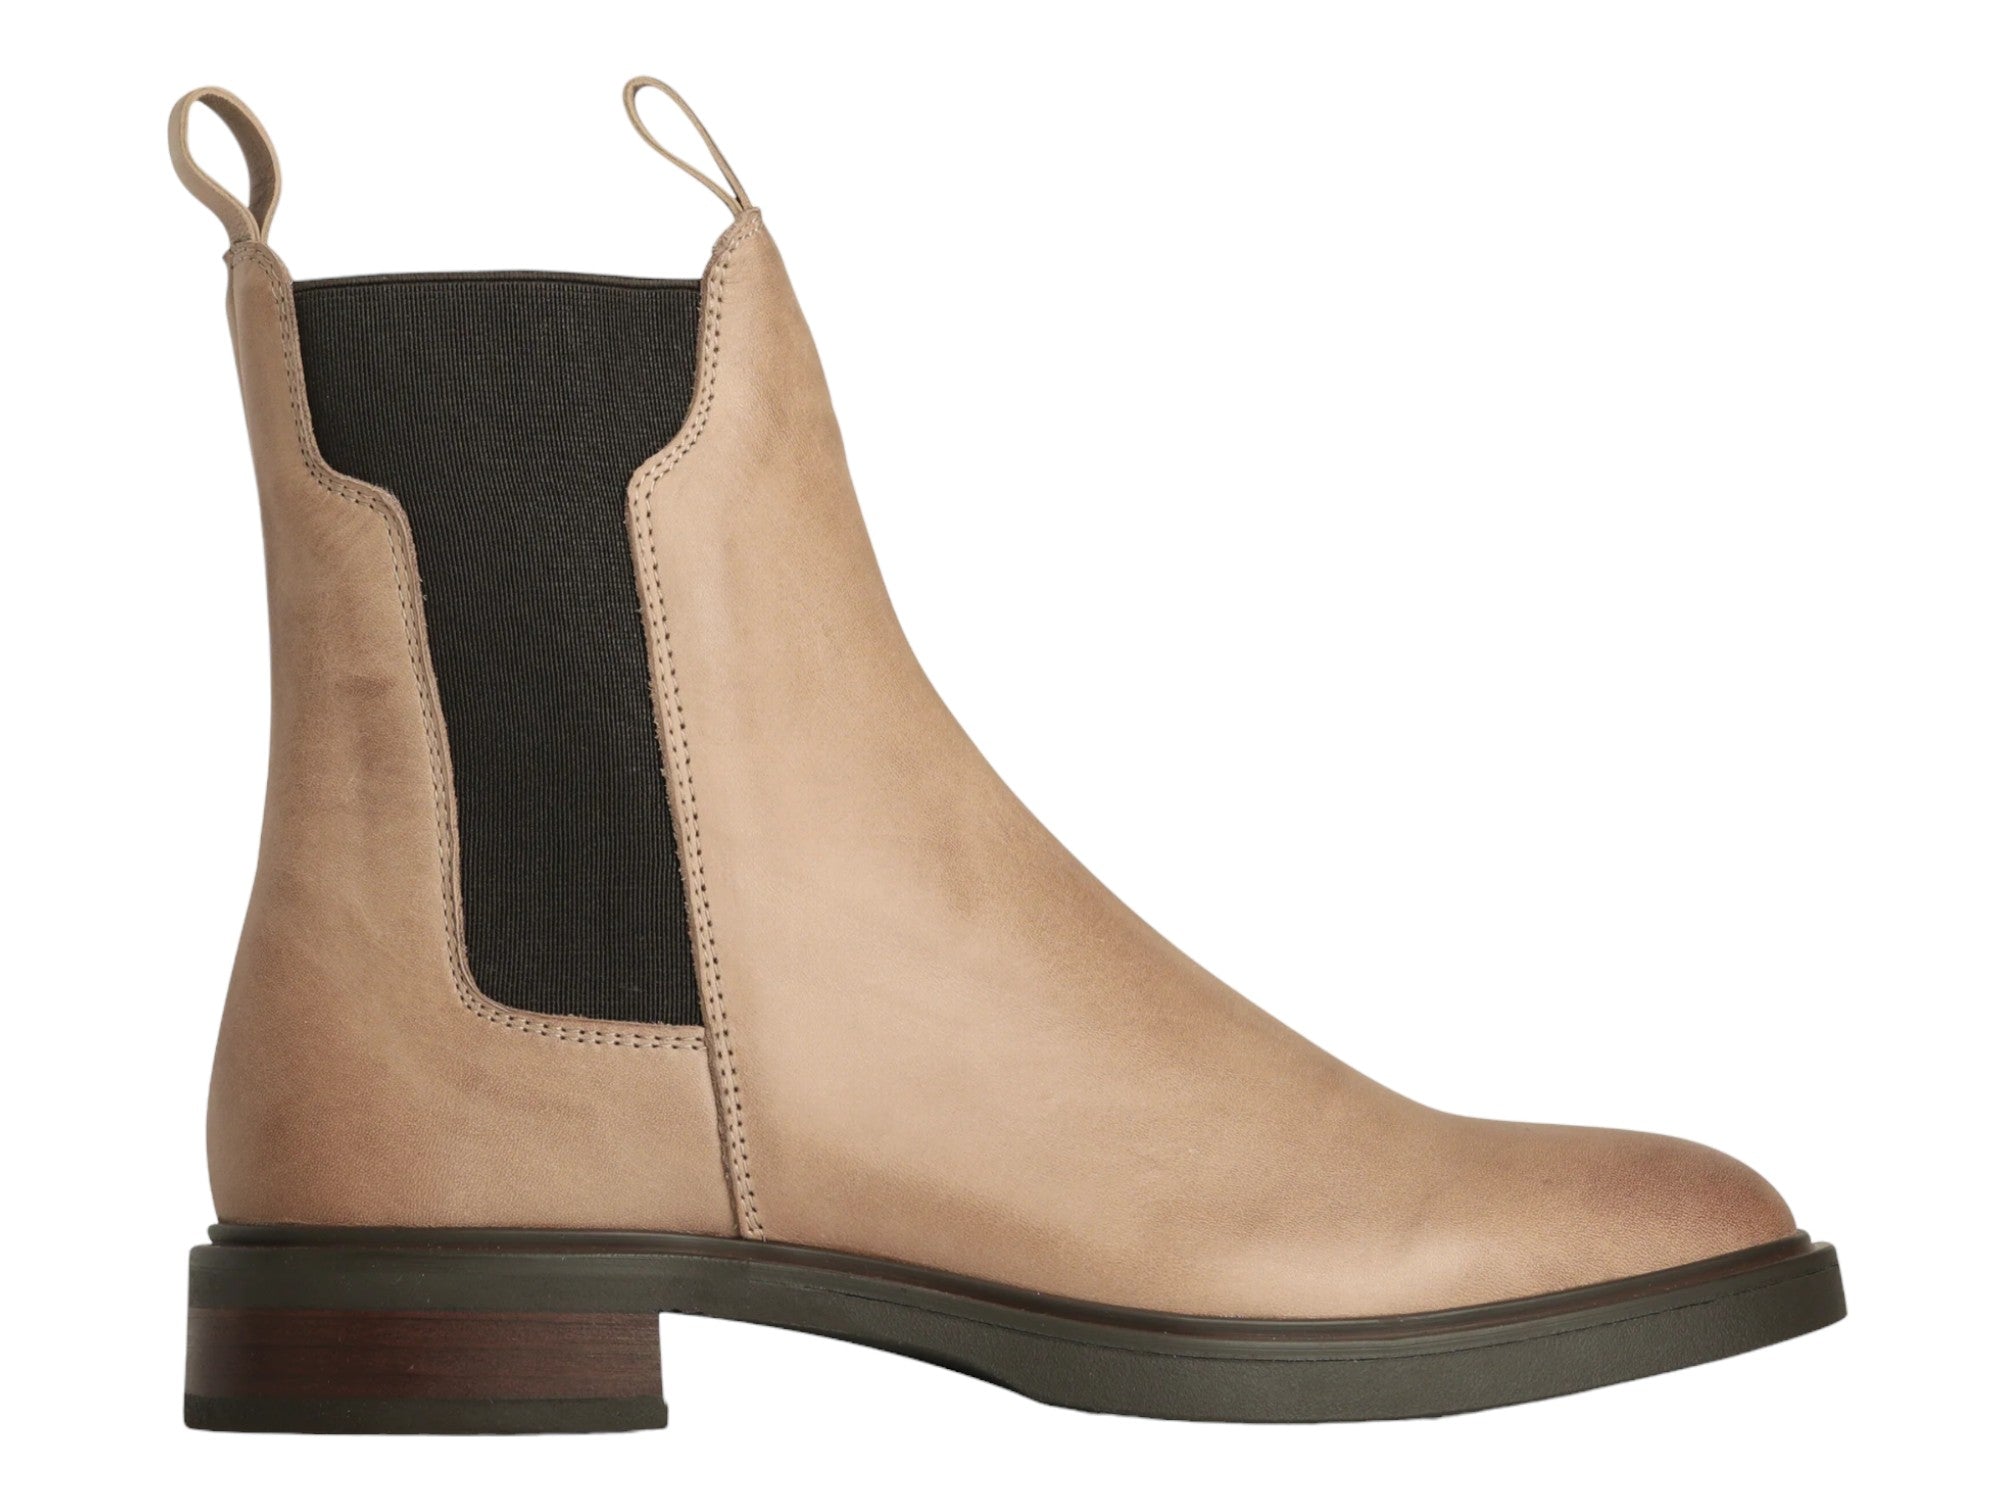 Eos Blaire Ankle Boot - Women's